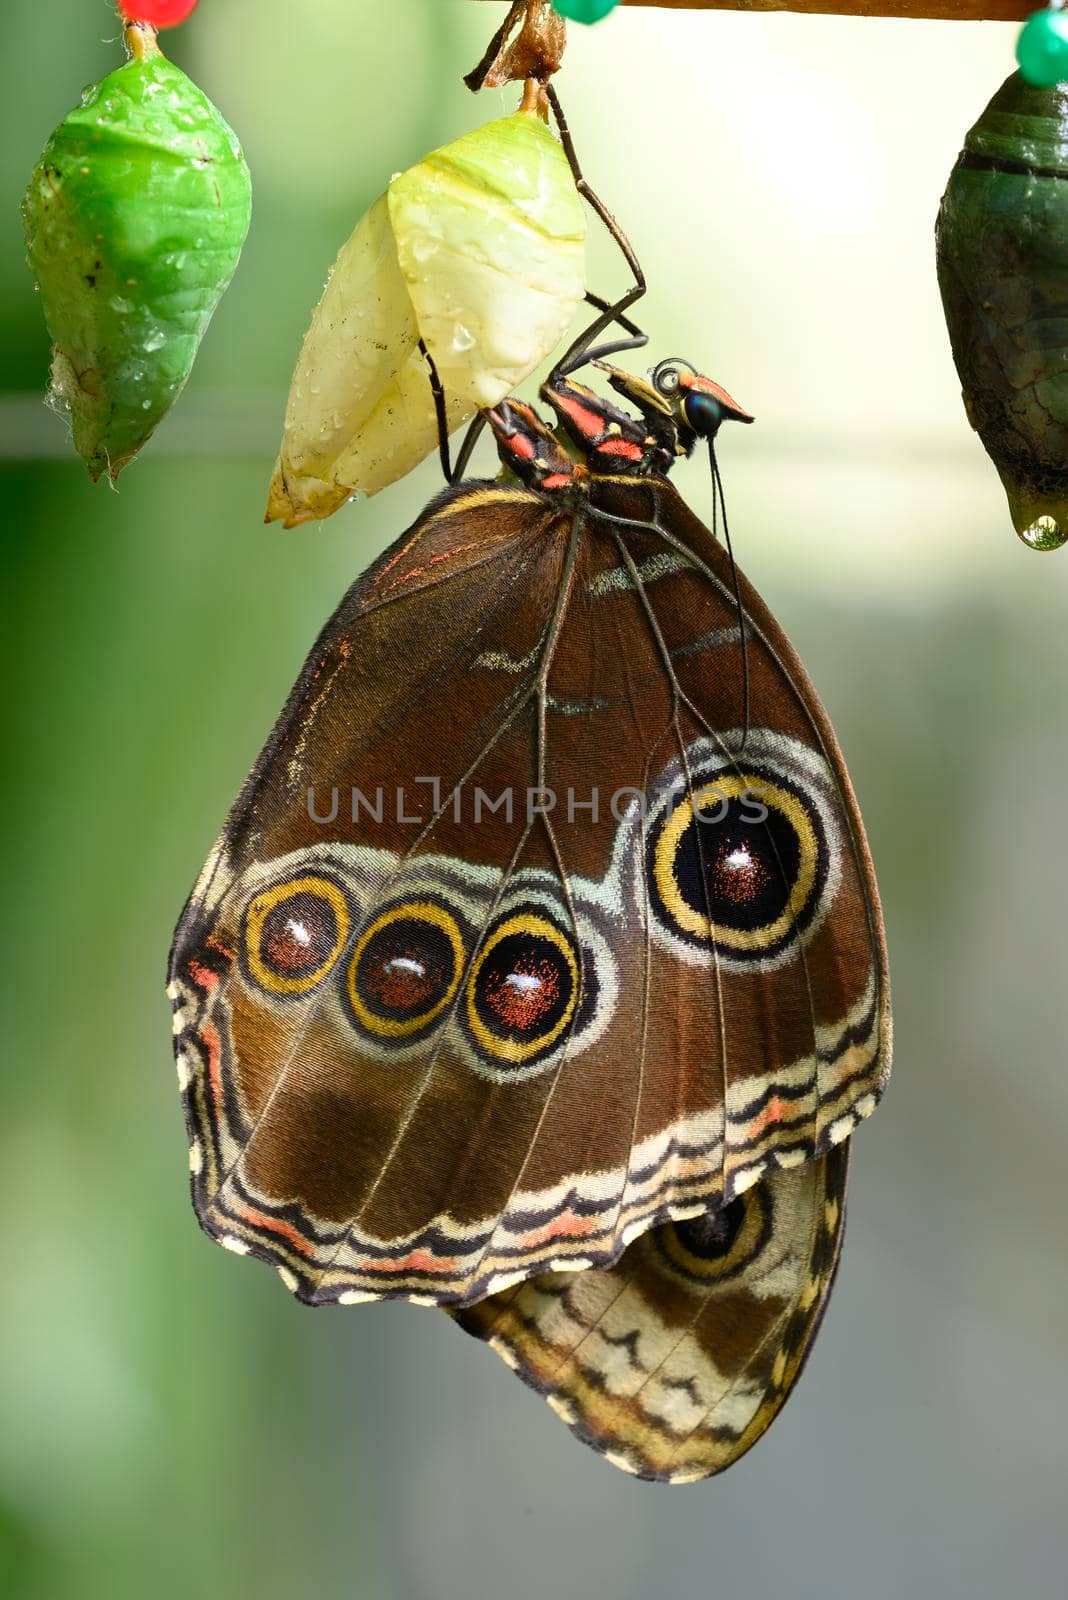 Close up of tropical Morpho butterfly coming out of chrysalis